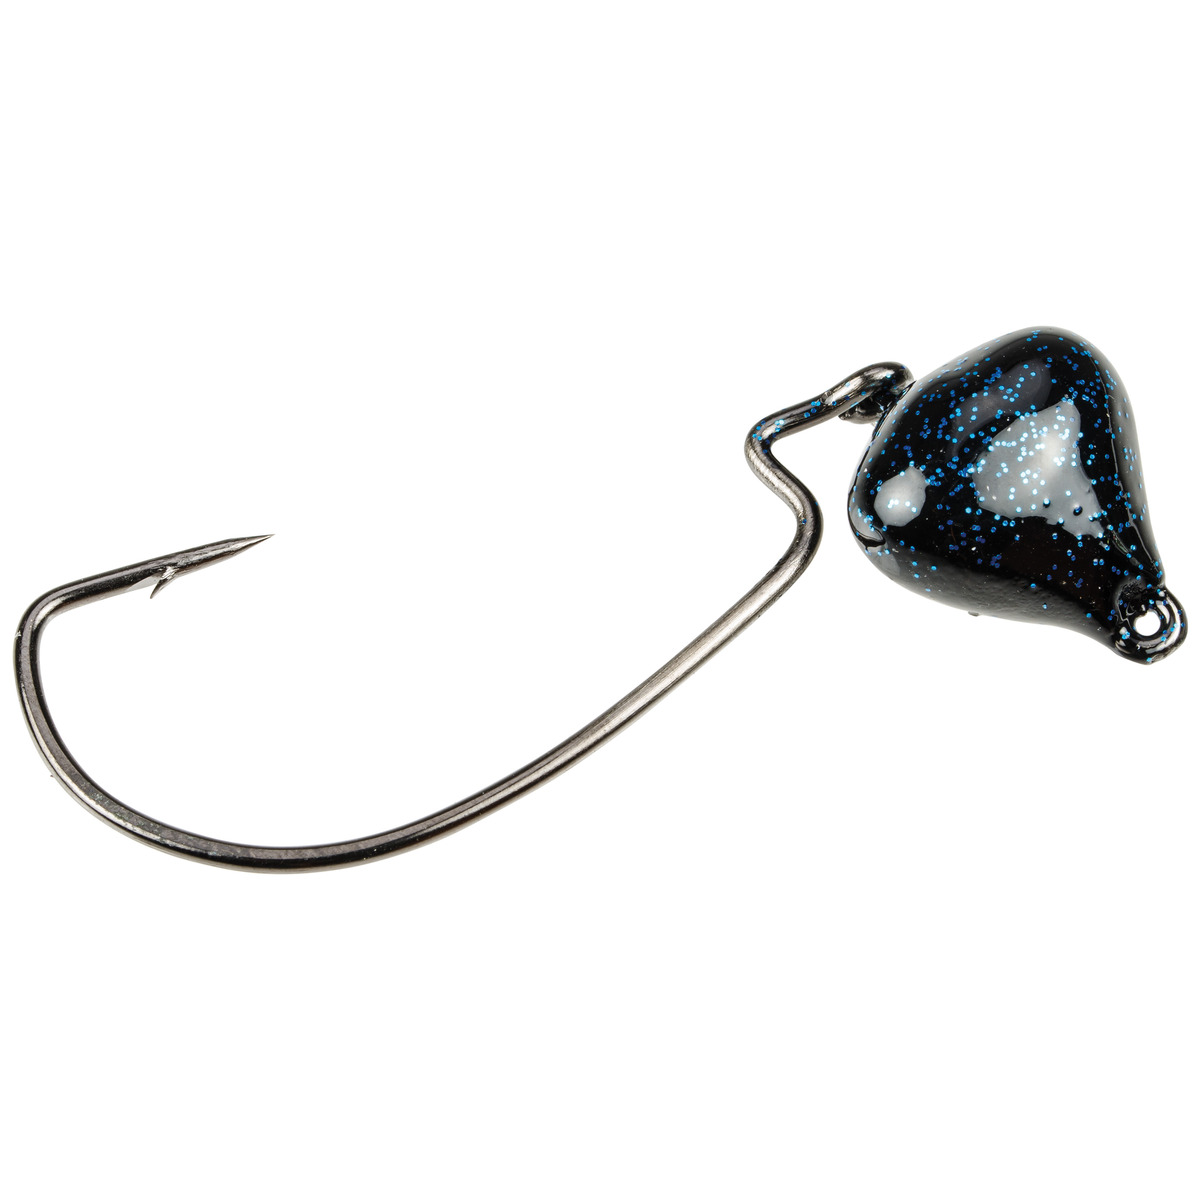 Strike King Md Jointed Structure Head - Black/Blue 10.6G